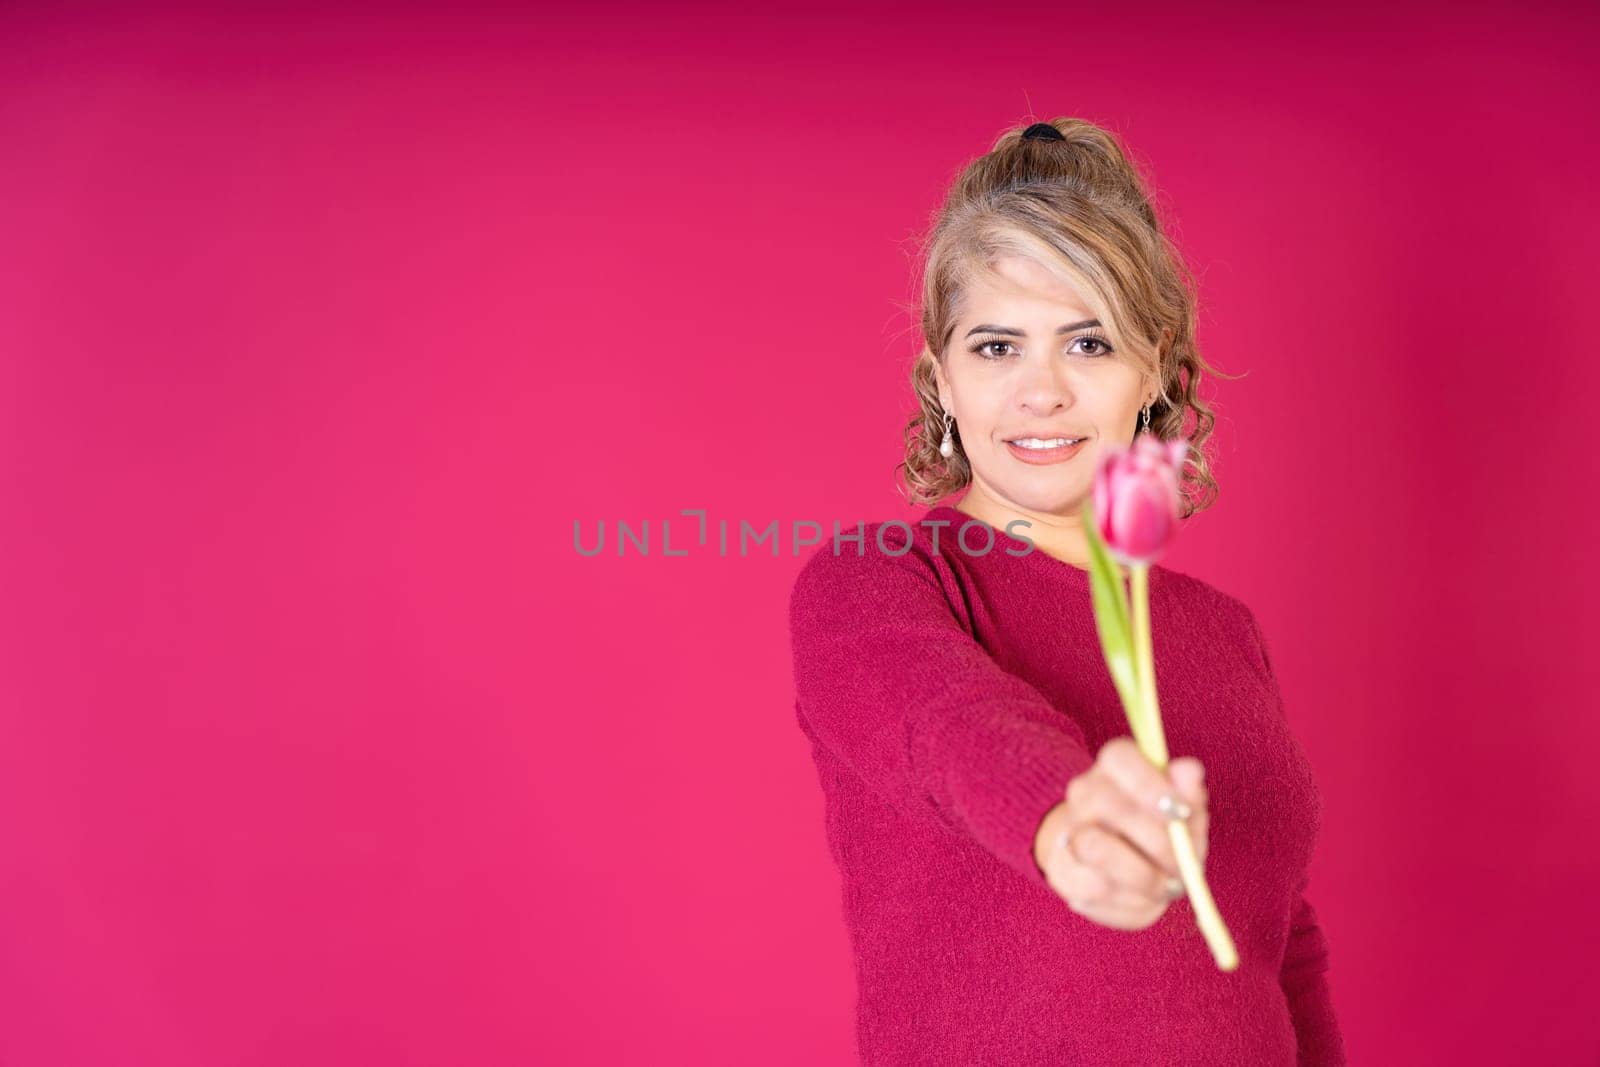 Young pretty woman smiling looking at camera offering a tulip flower, wearing a red t-shirt on a red background with copy space. Gifts concept.